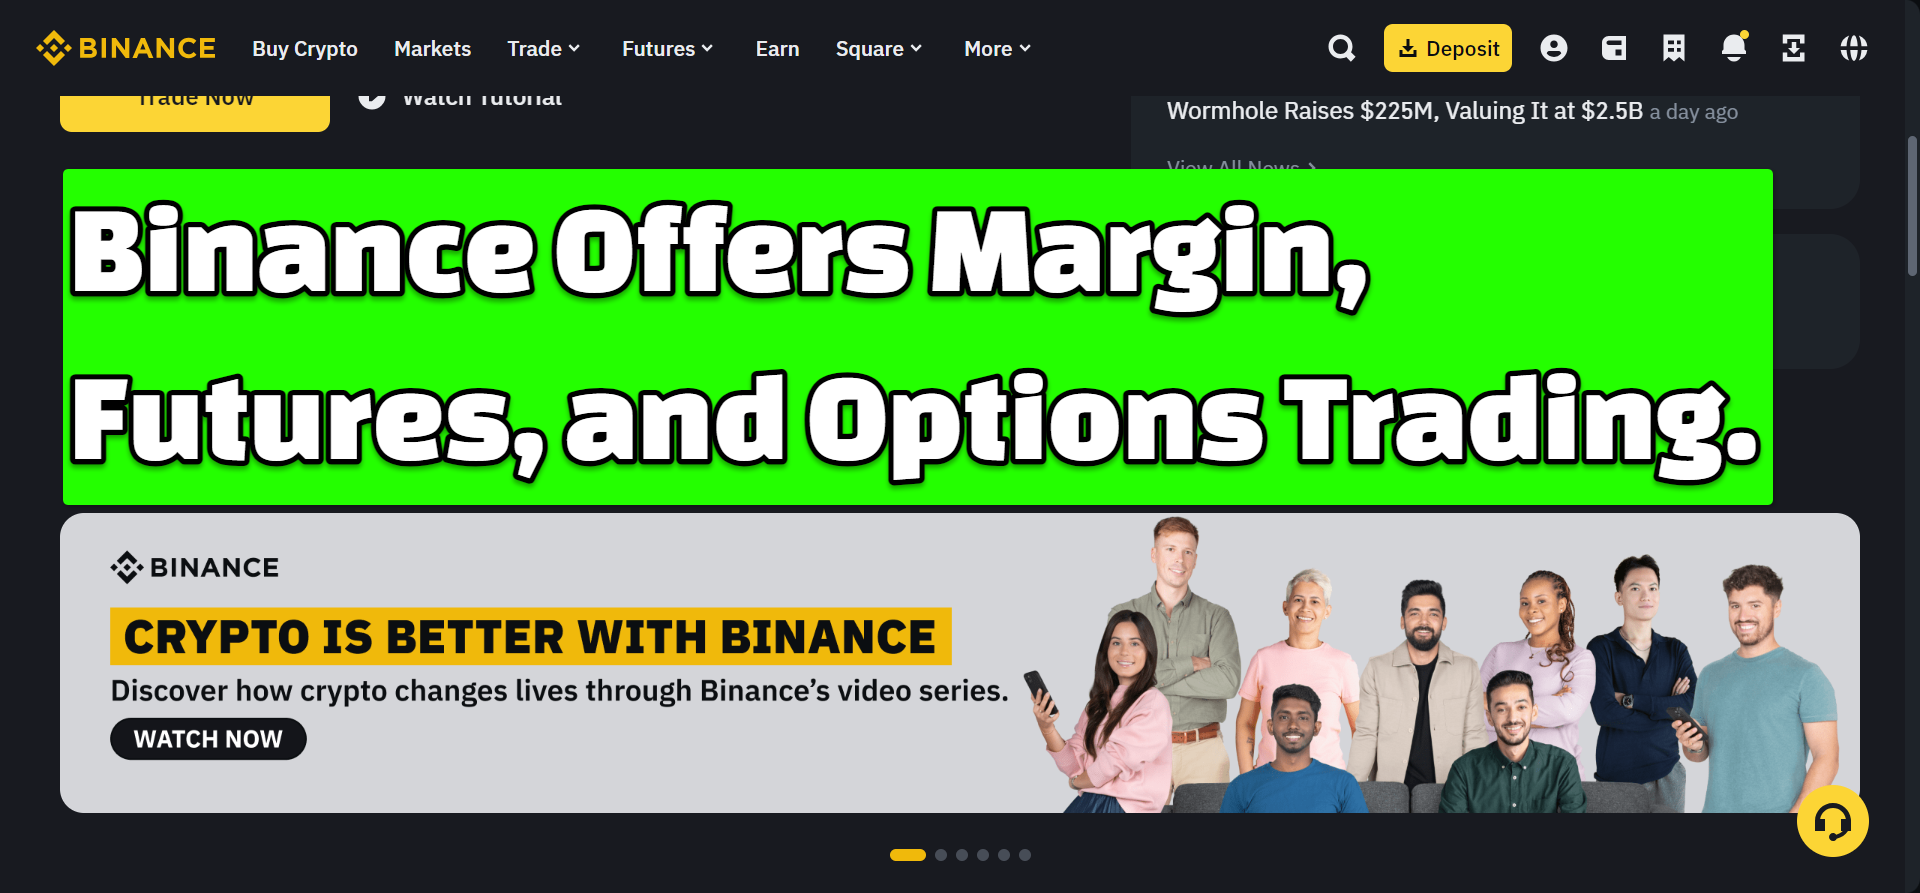 Binance Cryptocurrency Exchange for Bitcoin Ethereum Altcoins 2 Binance Offers Margin, Futures, and Options Trading.